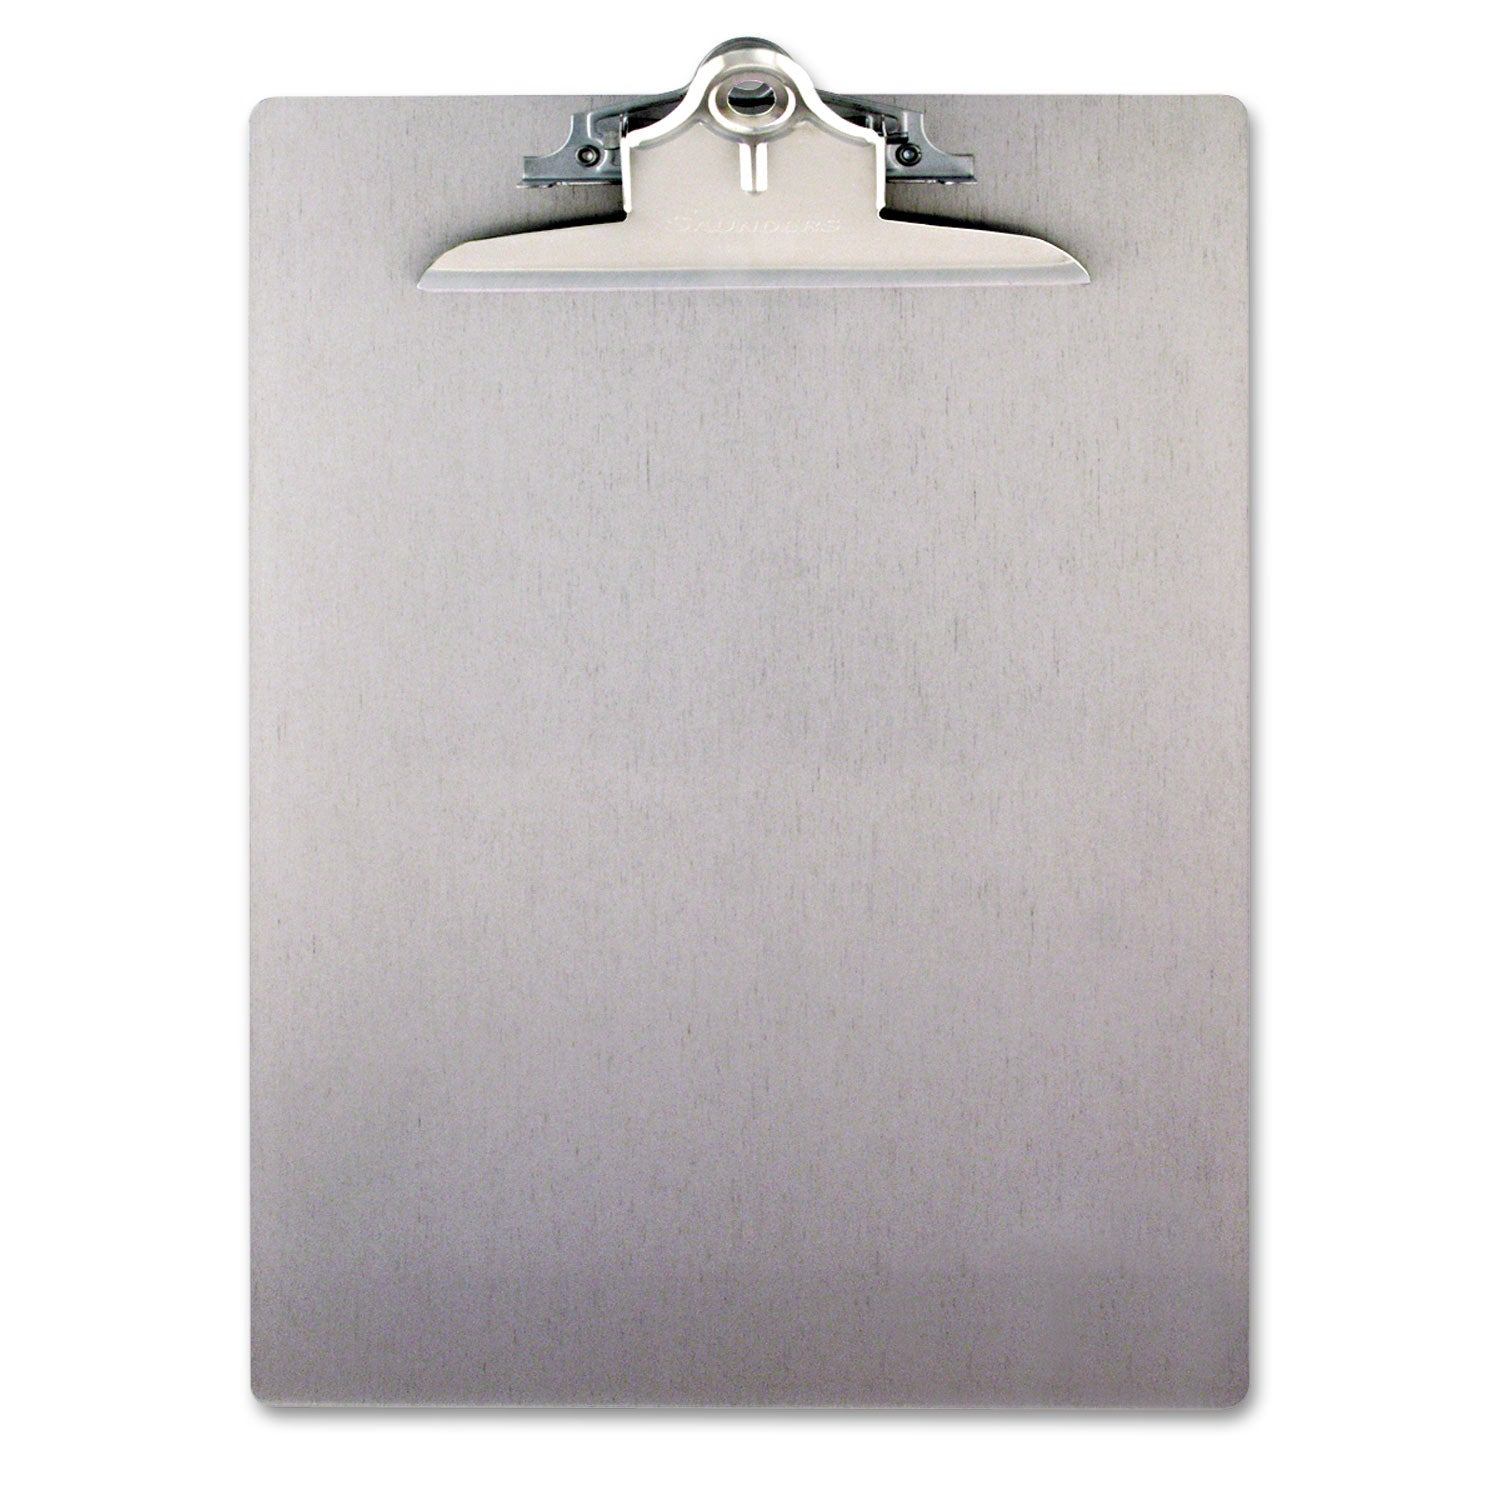 Recycled Aluminum Clipboard with High-Capacity Clip, 1" Clip Capacity, Holds 8.5 x 11 Sheets, Silver - 